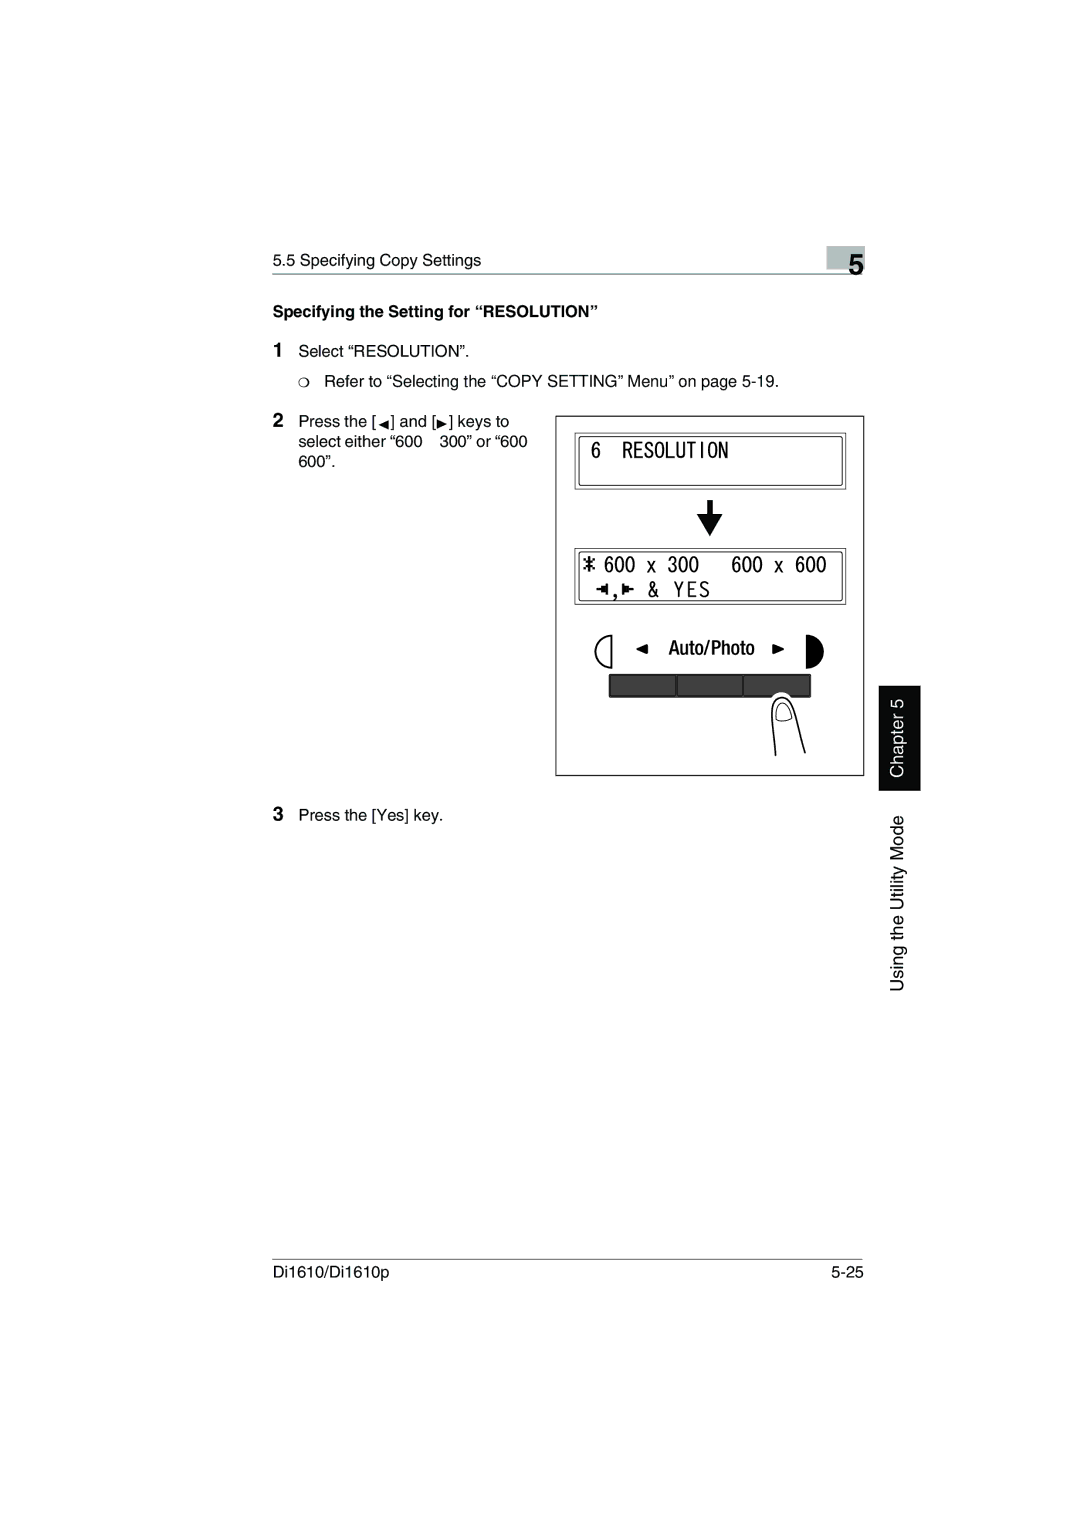 Konica Minolta Di1610p user manual Specifying the Setting for Resolution 